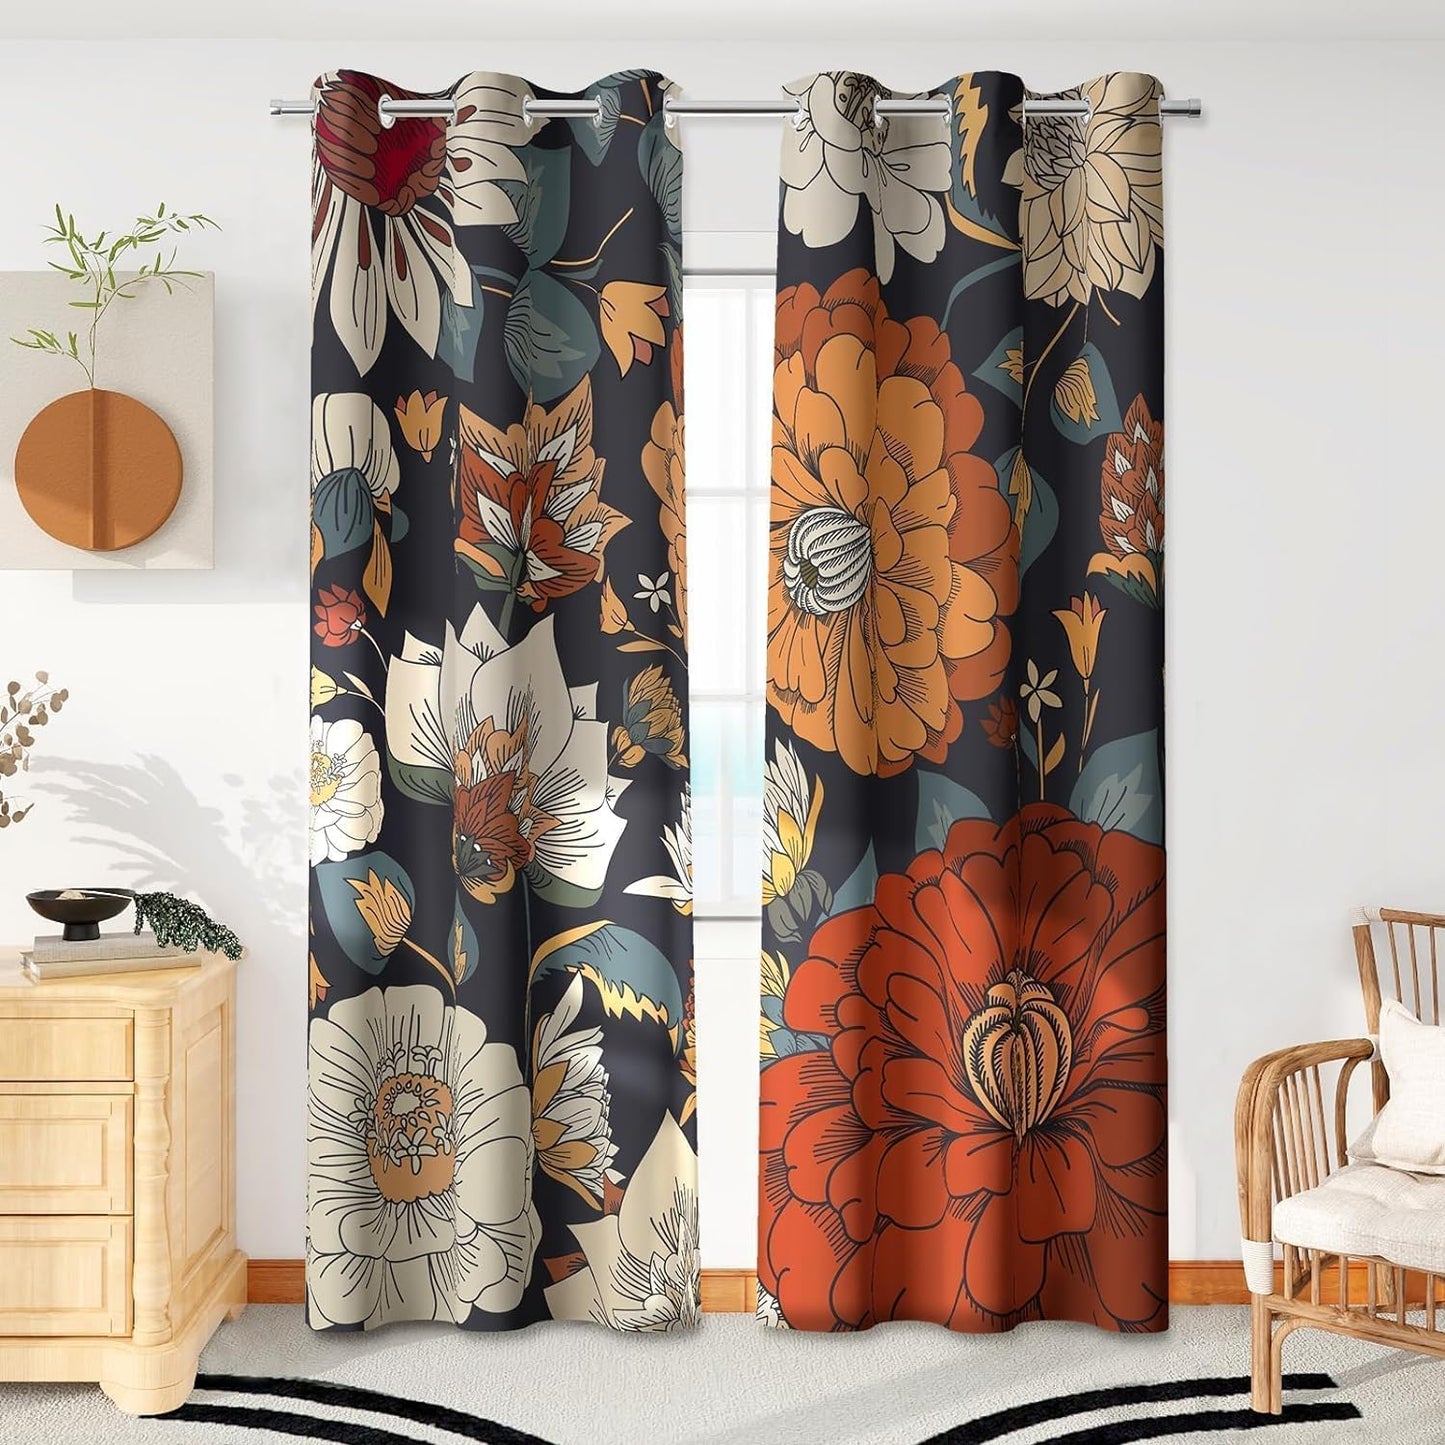 Boho Floral 100% Blackout Curtains for Living Room 96 Inch Long 2 Panels Mid Century Botanical Black Out Curtains for Bedroom Grommet Thermal Insulated Room Darkening Window Drapes,52Wx96L  Tyrot Boho Floral 42W X 84L Inch X 2 Panels 